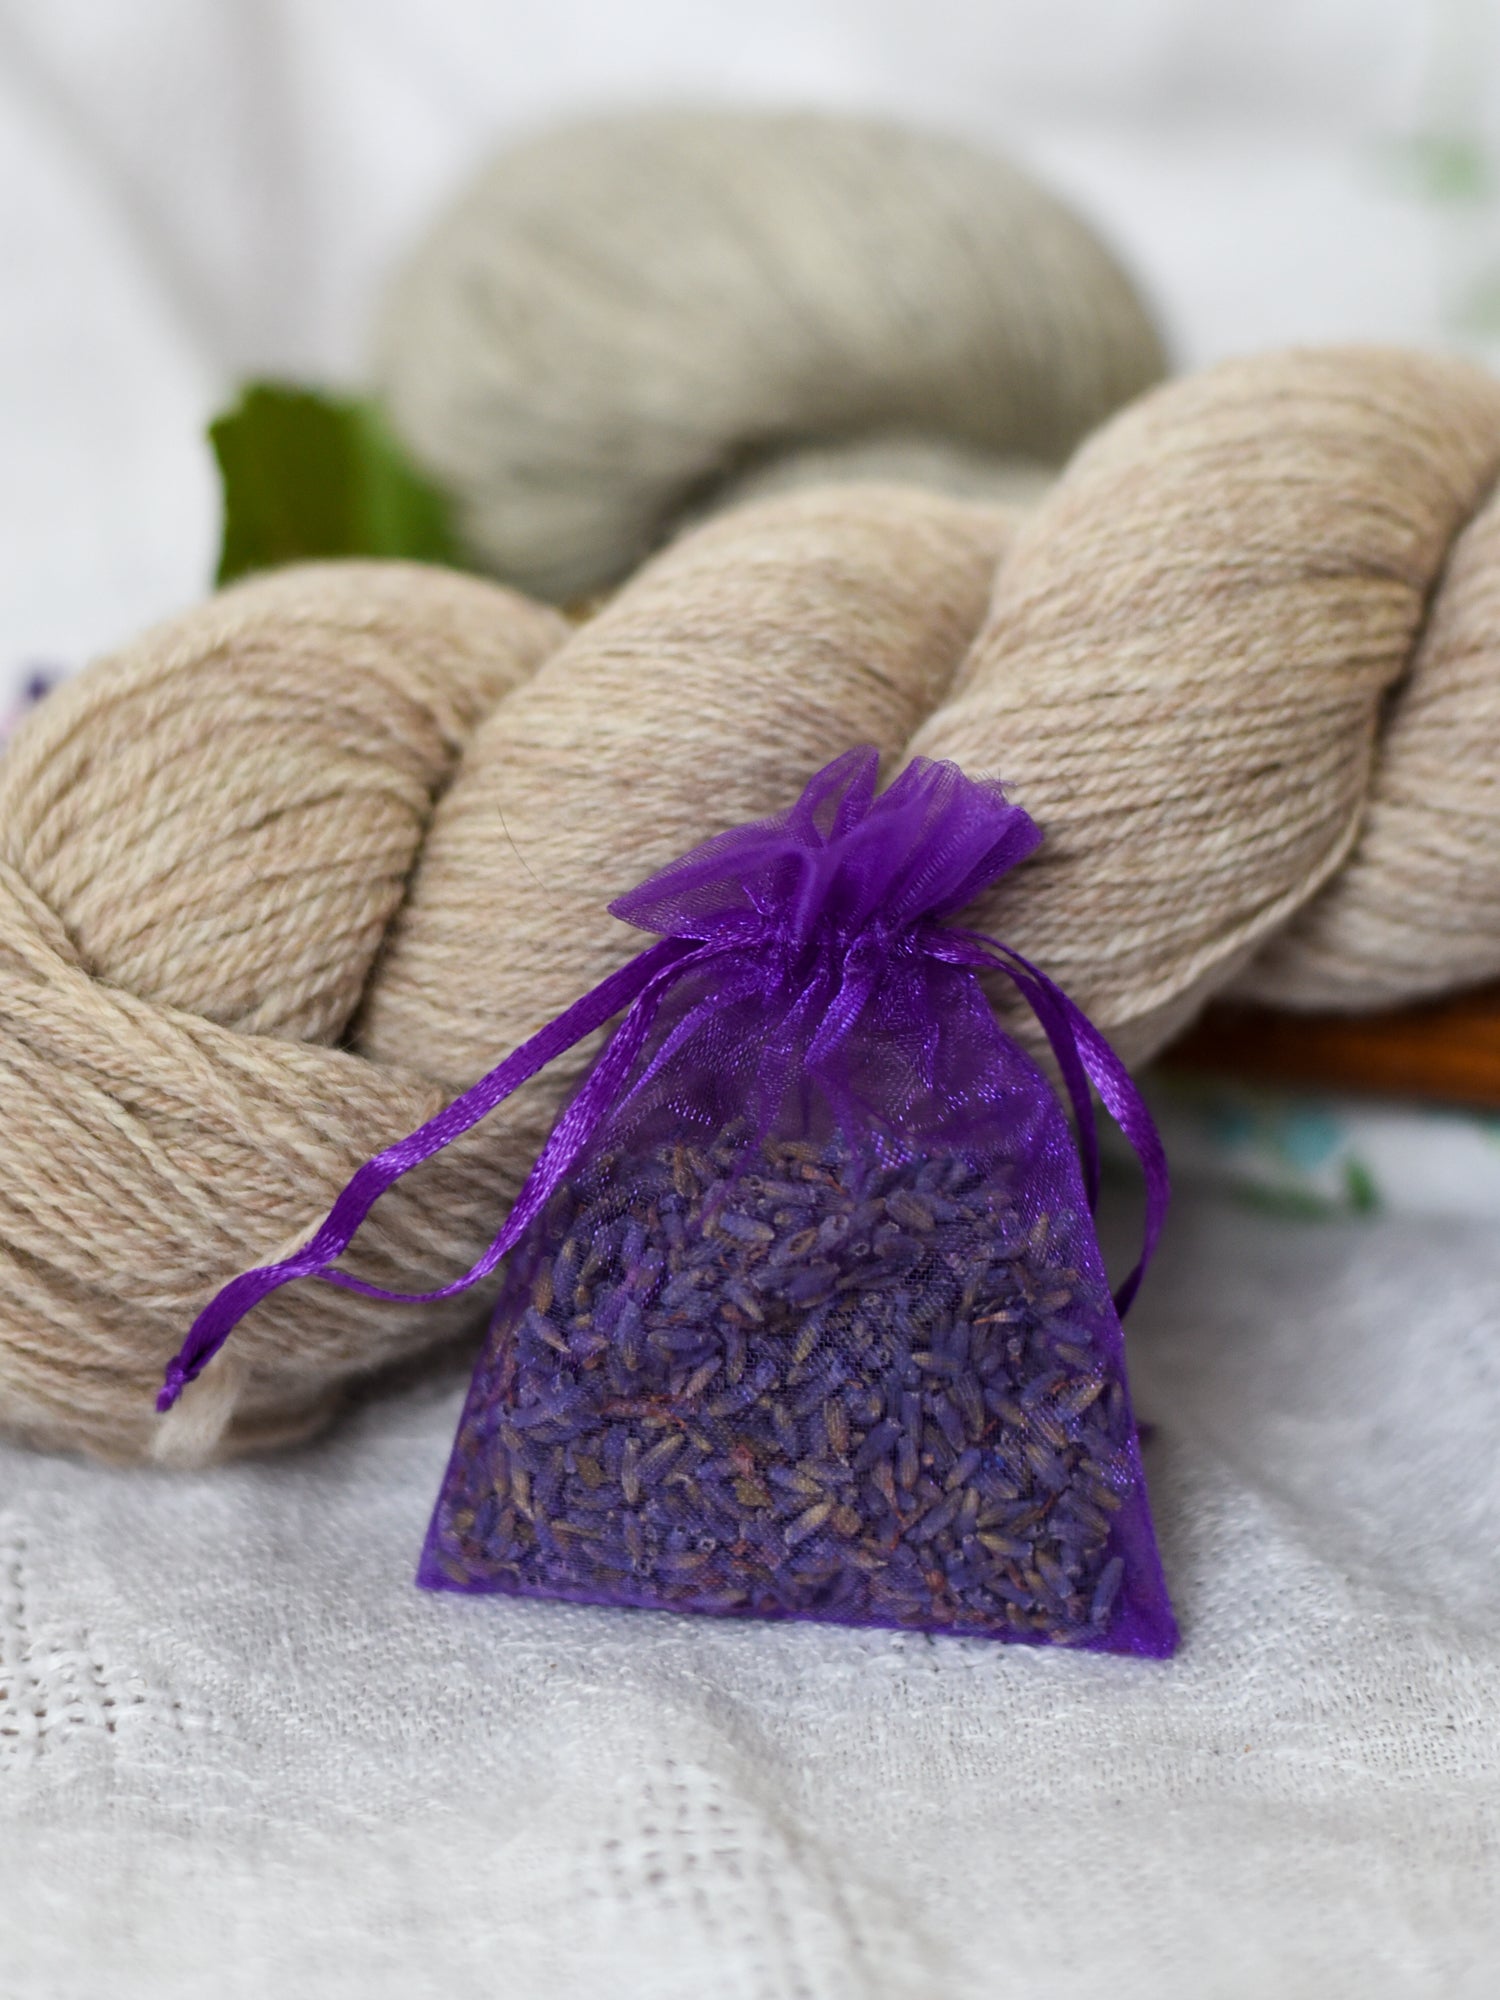 Lavender Sachet In A Woolen Jacket Pocket In A Closet Moth Repellent Stock  Photo - Download Image Now - iStock